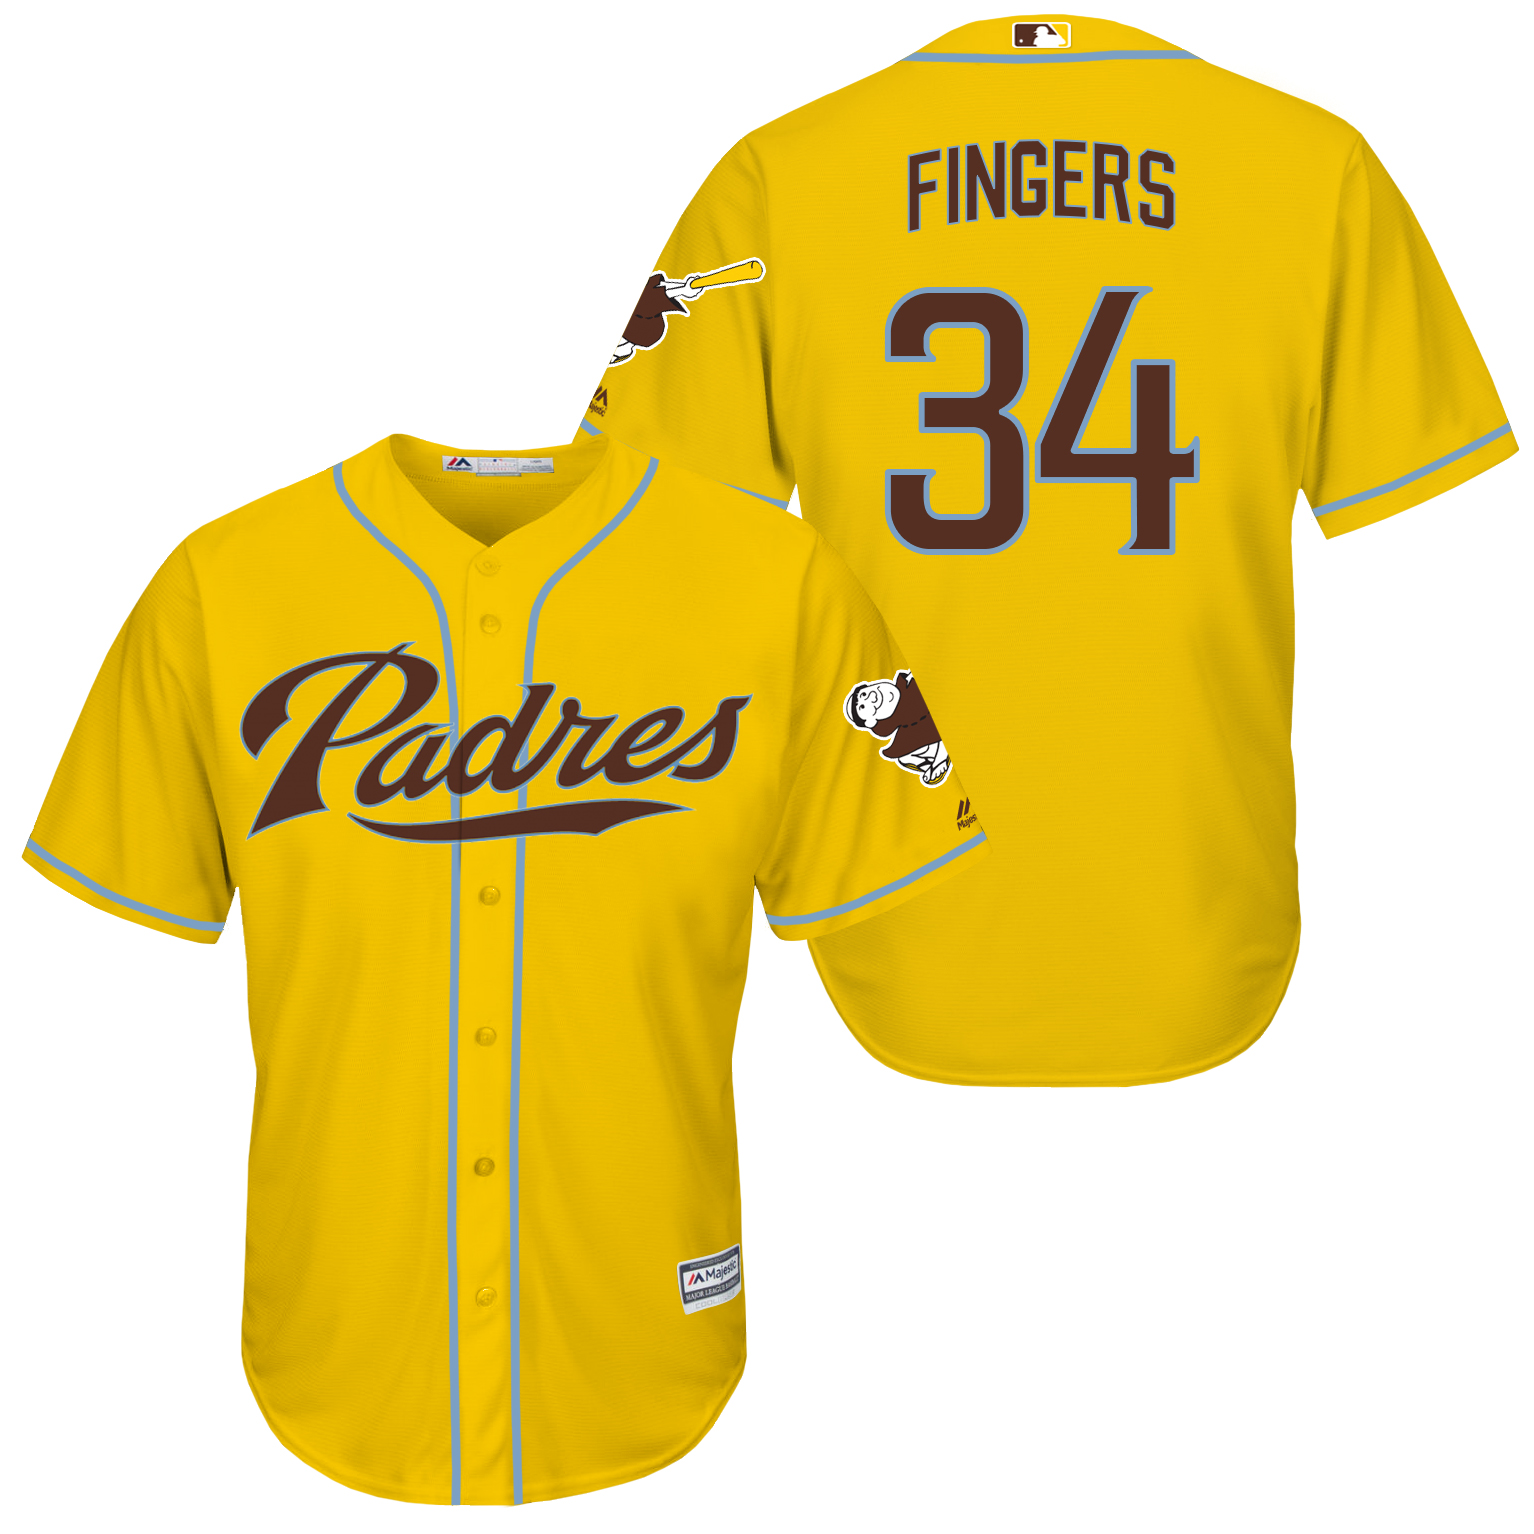 Padres 34 Rollie Fingers Yellow New Cool Base Jersey